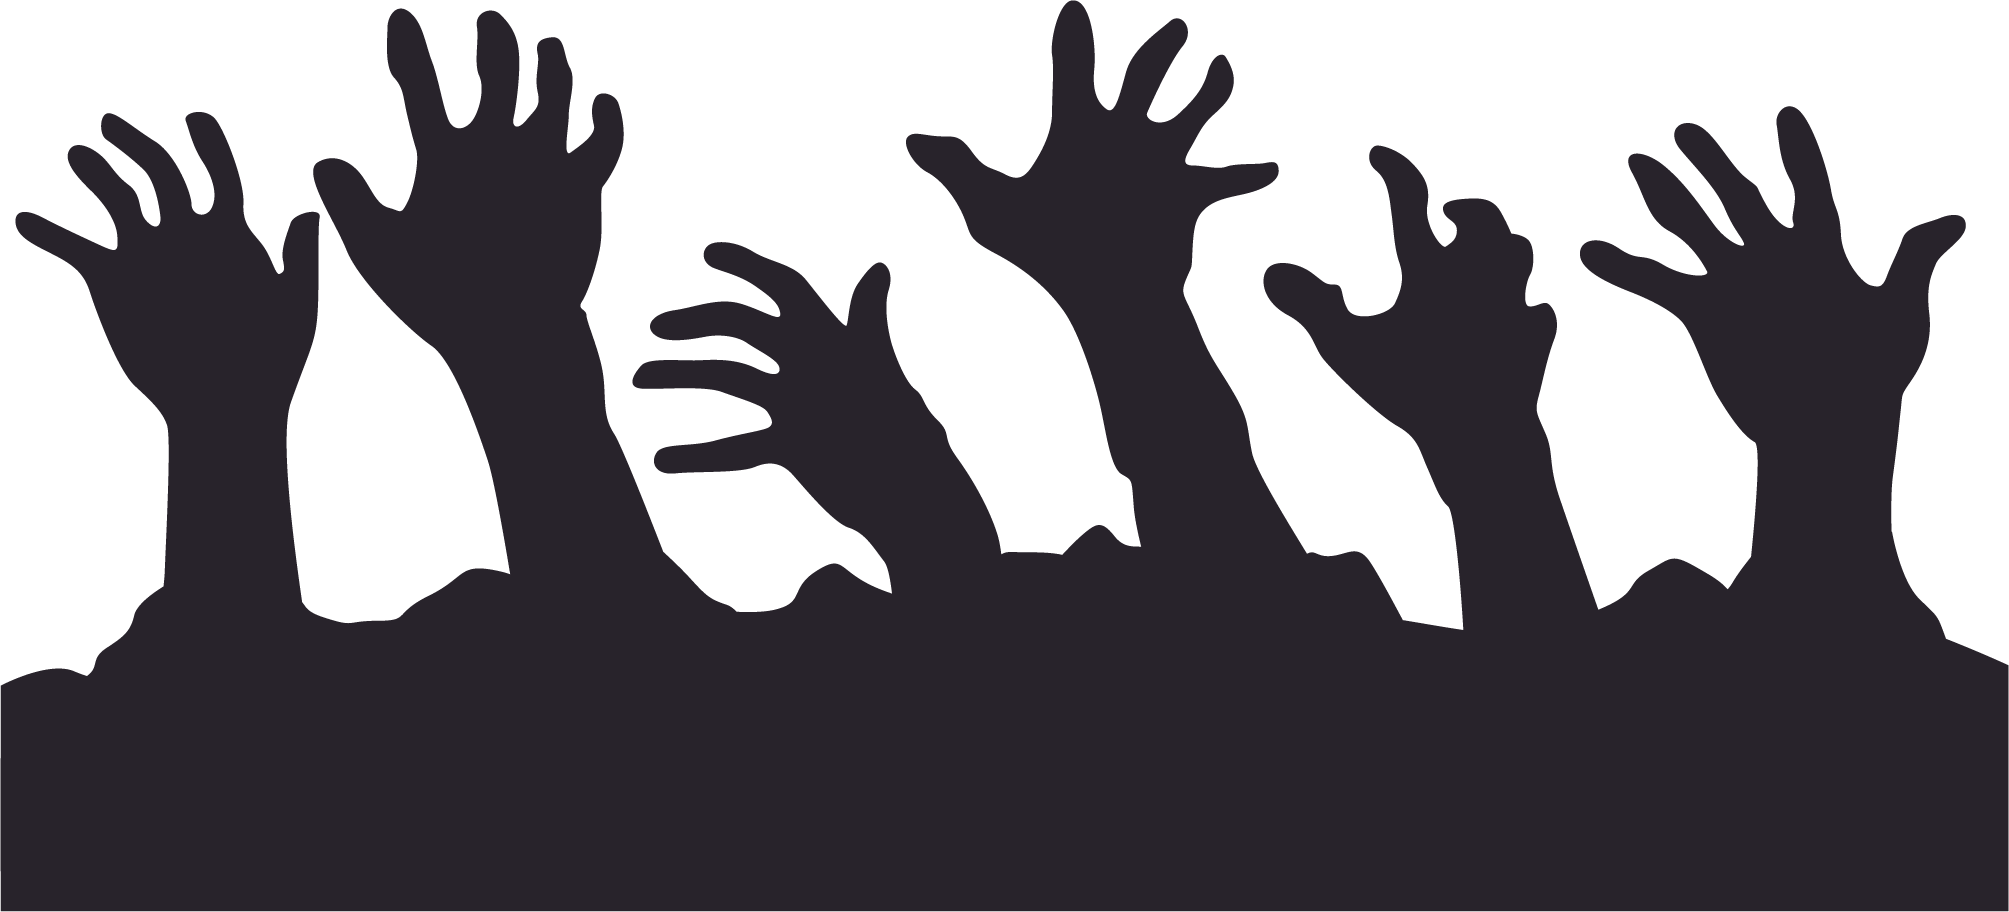 Hands clipart zombie, Hands zombie Transparent FREE for